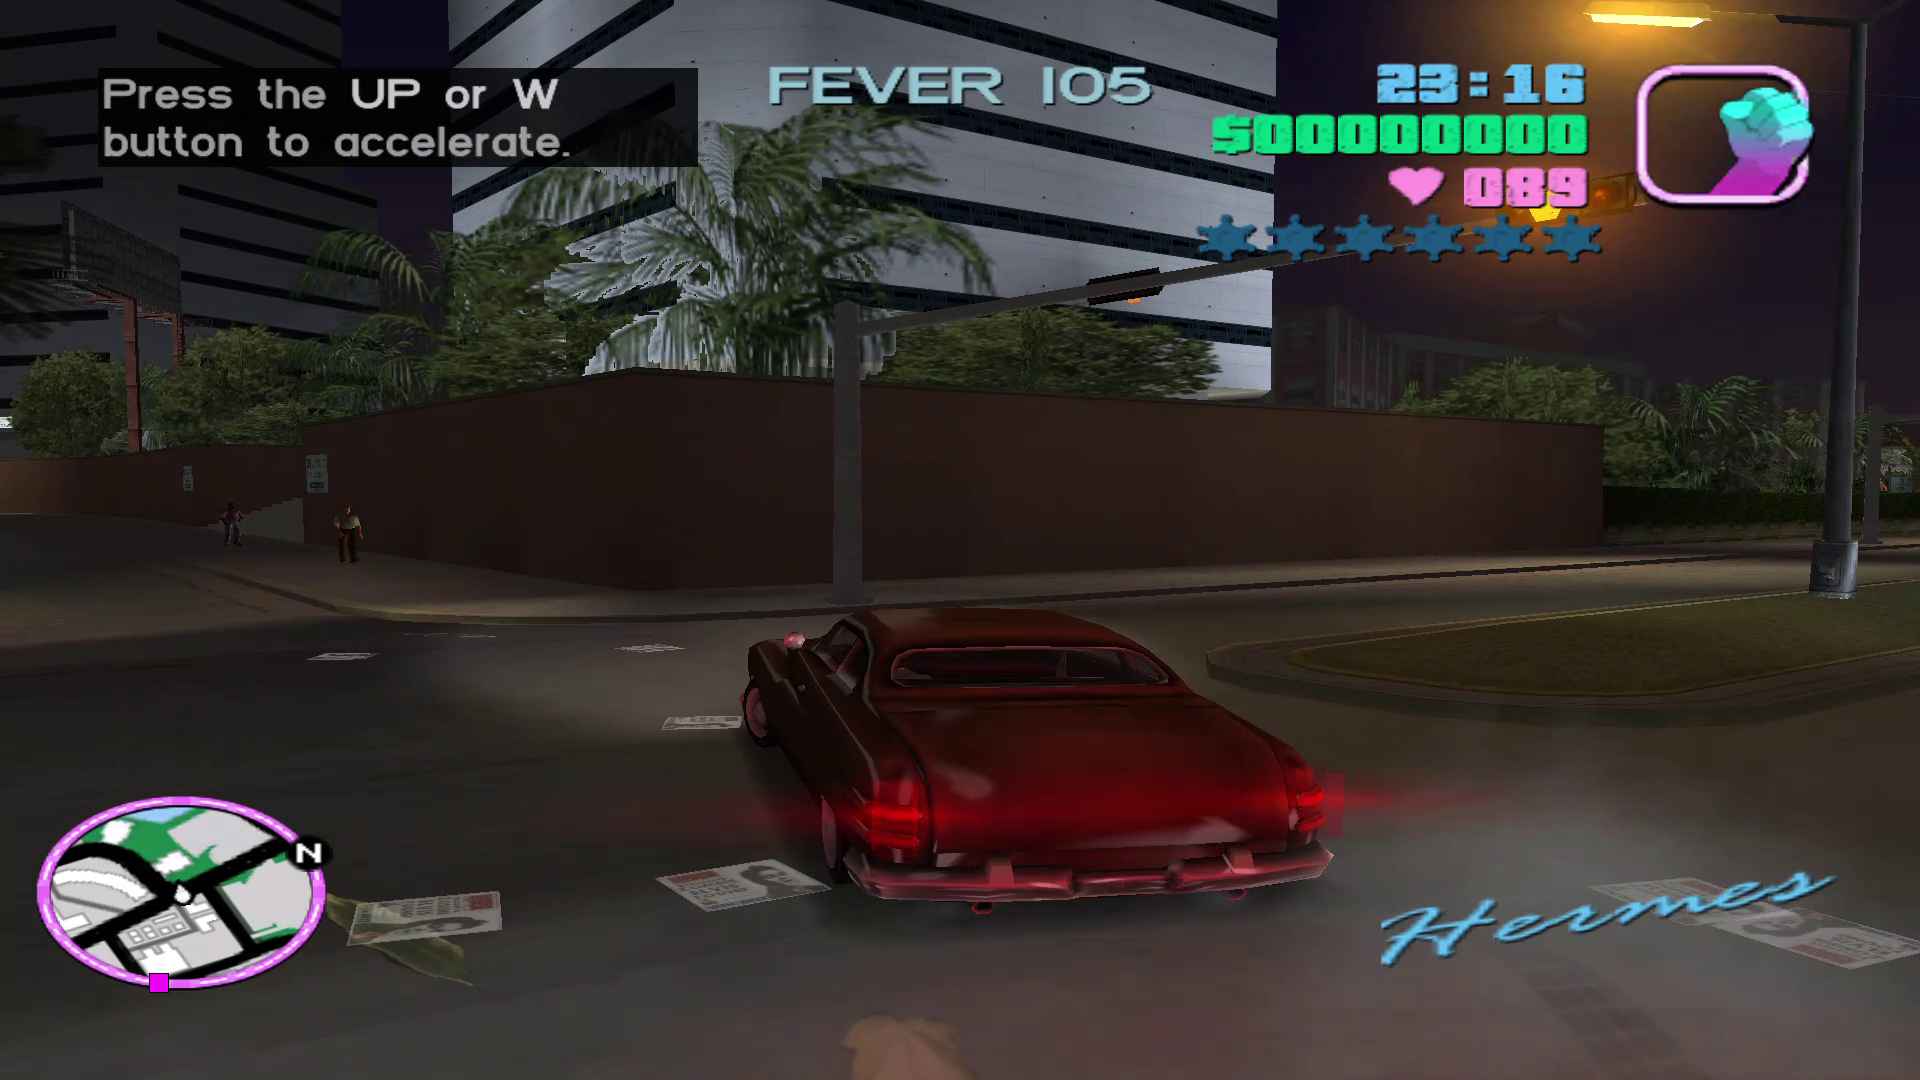 download gta vice city highly compressed 2mb